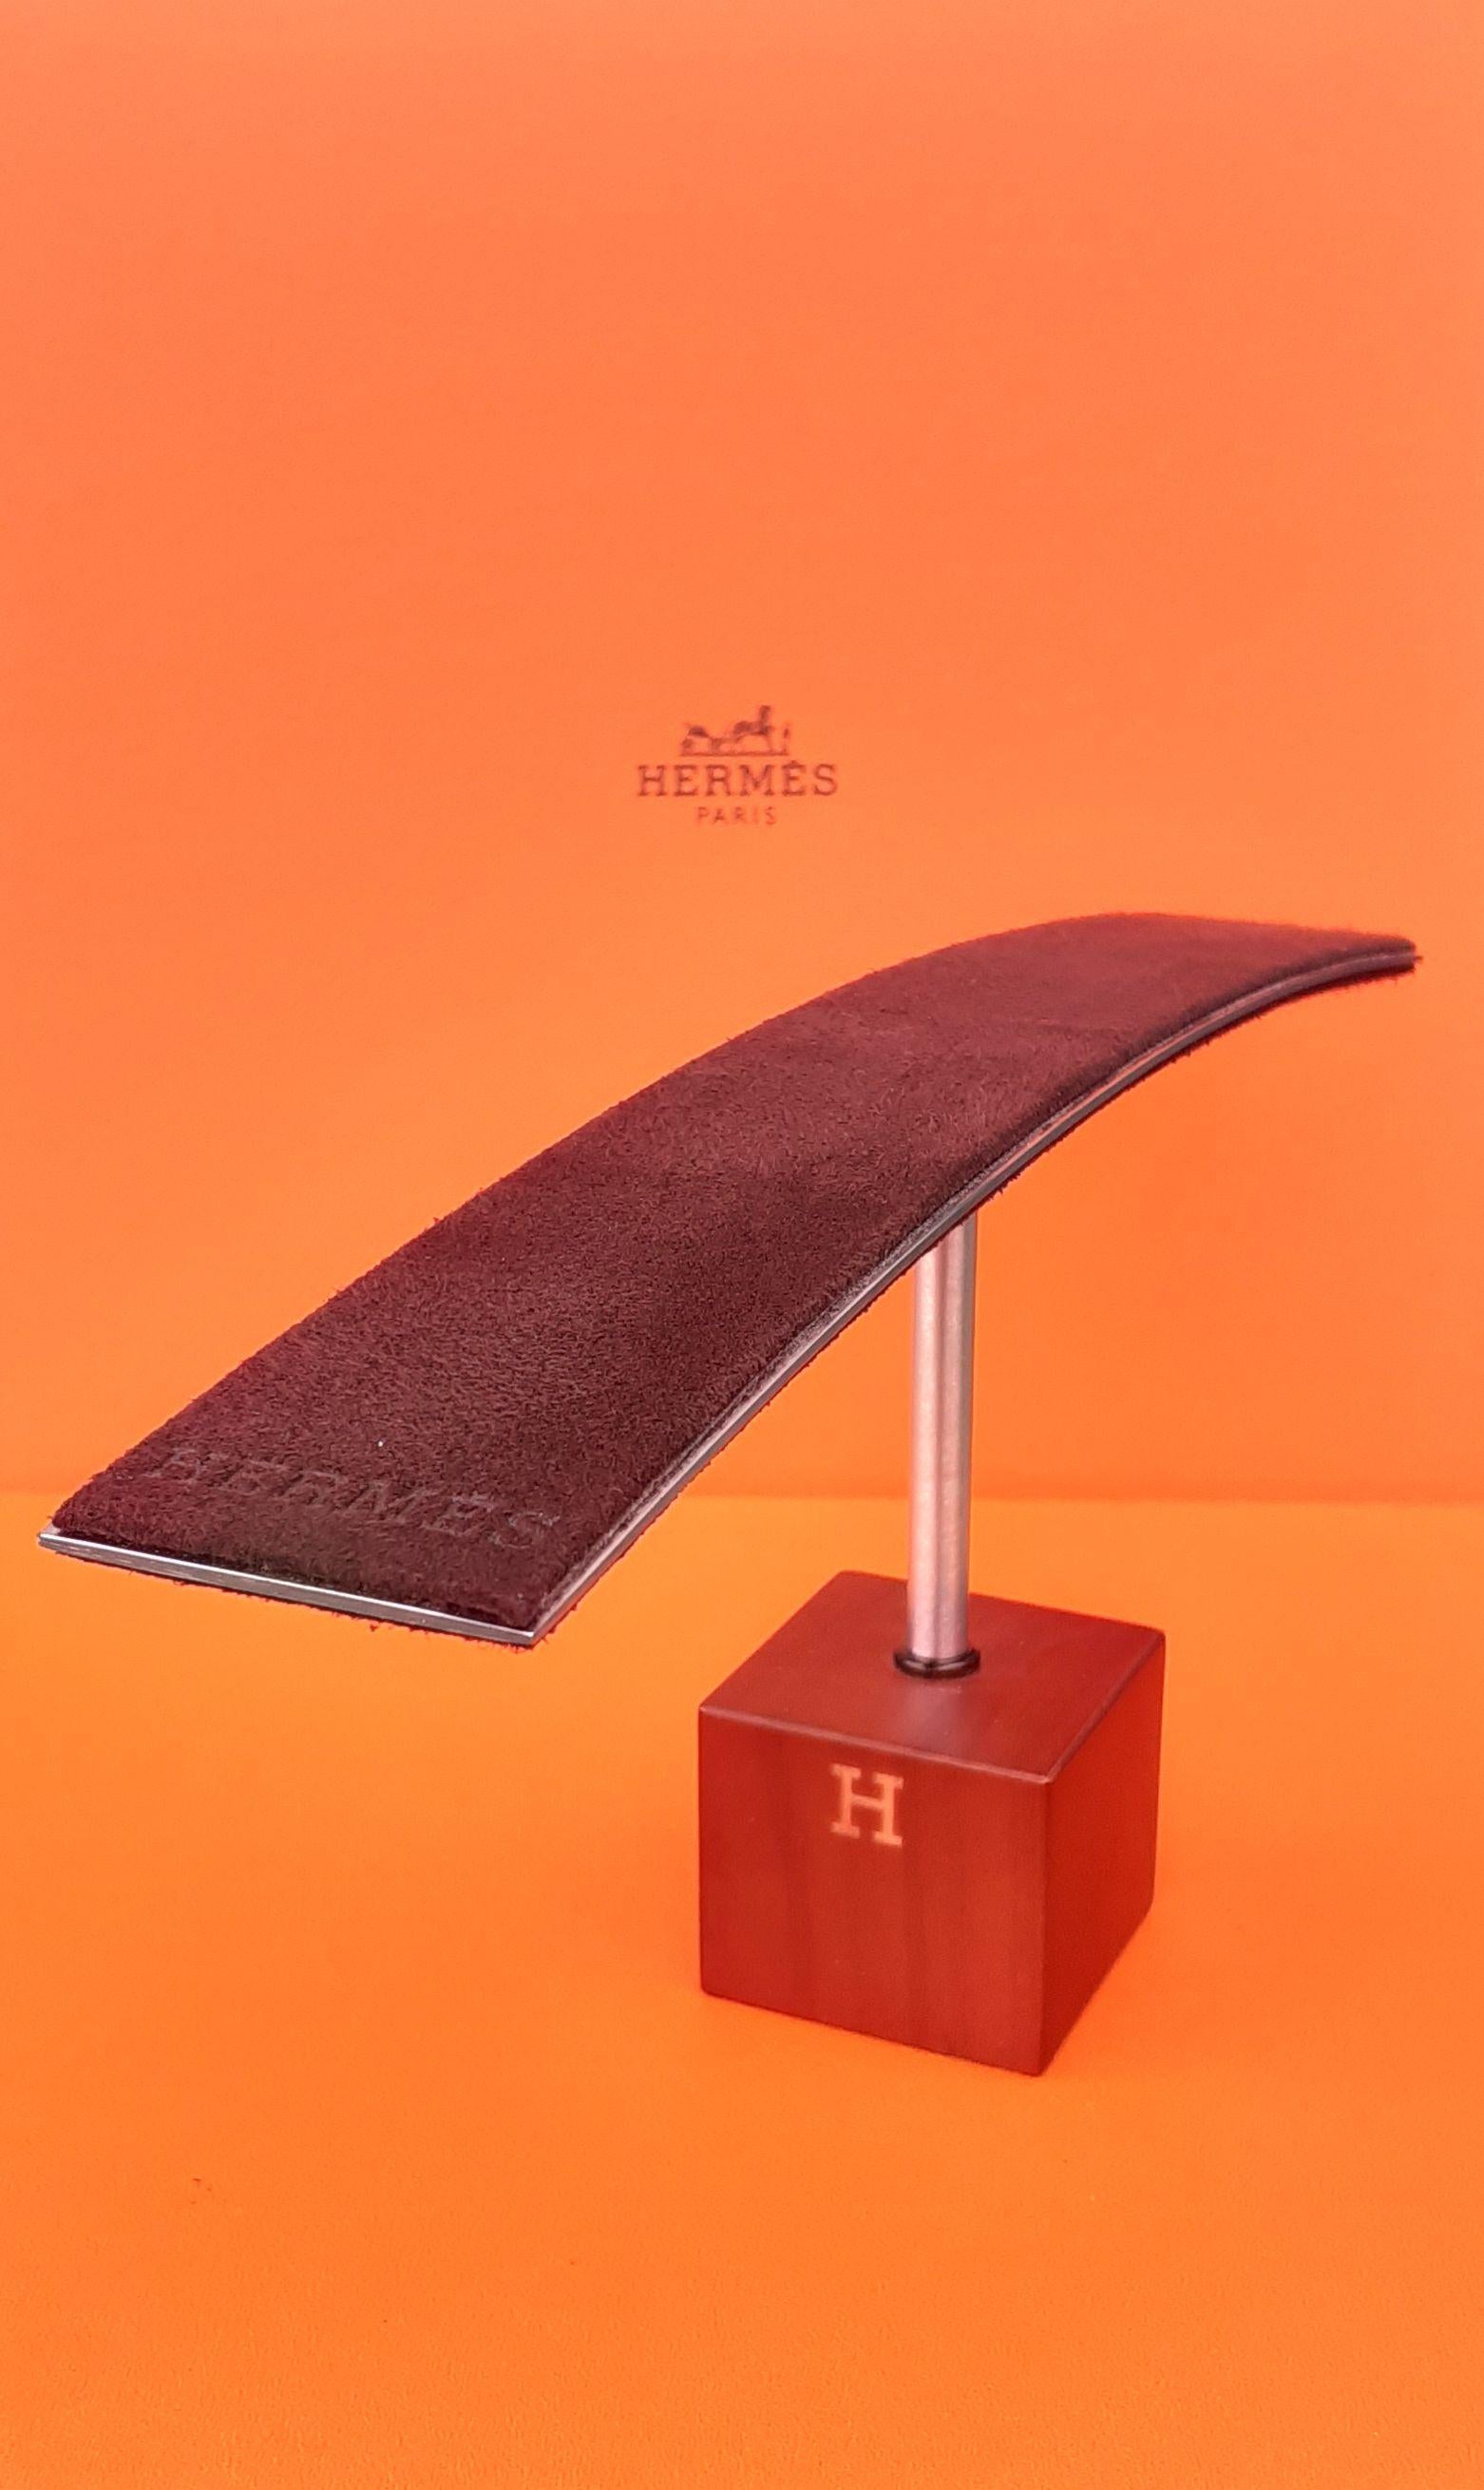 Hermès Watch or Jewelry Display Stand Holder in Felt and Wood For Sale 2